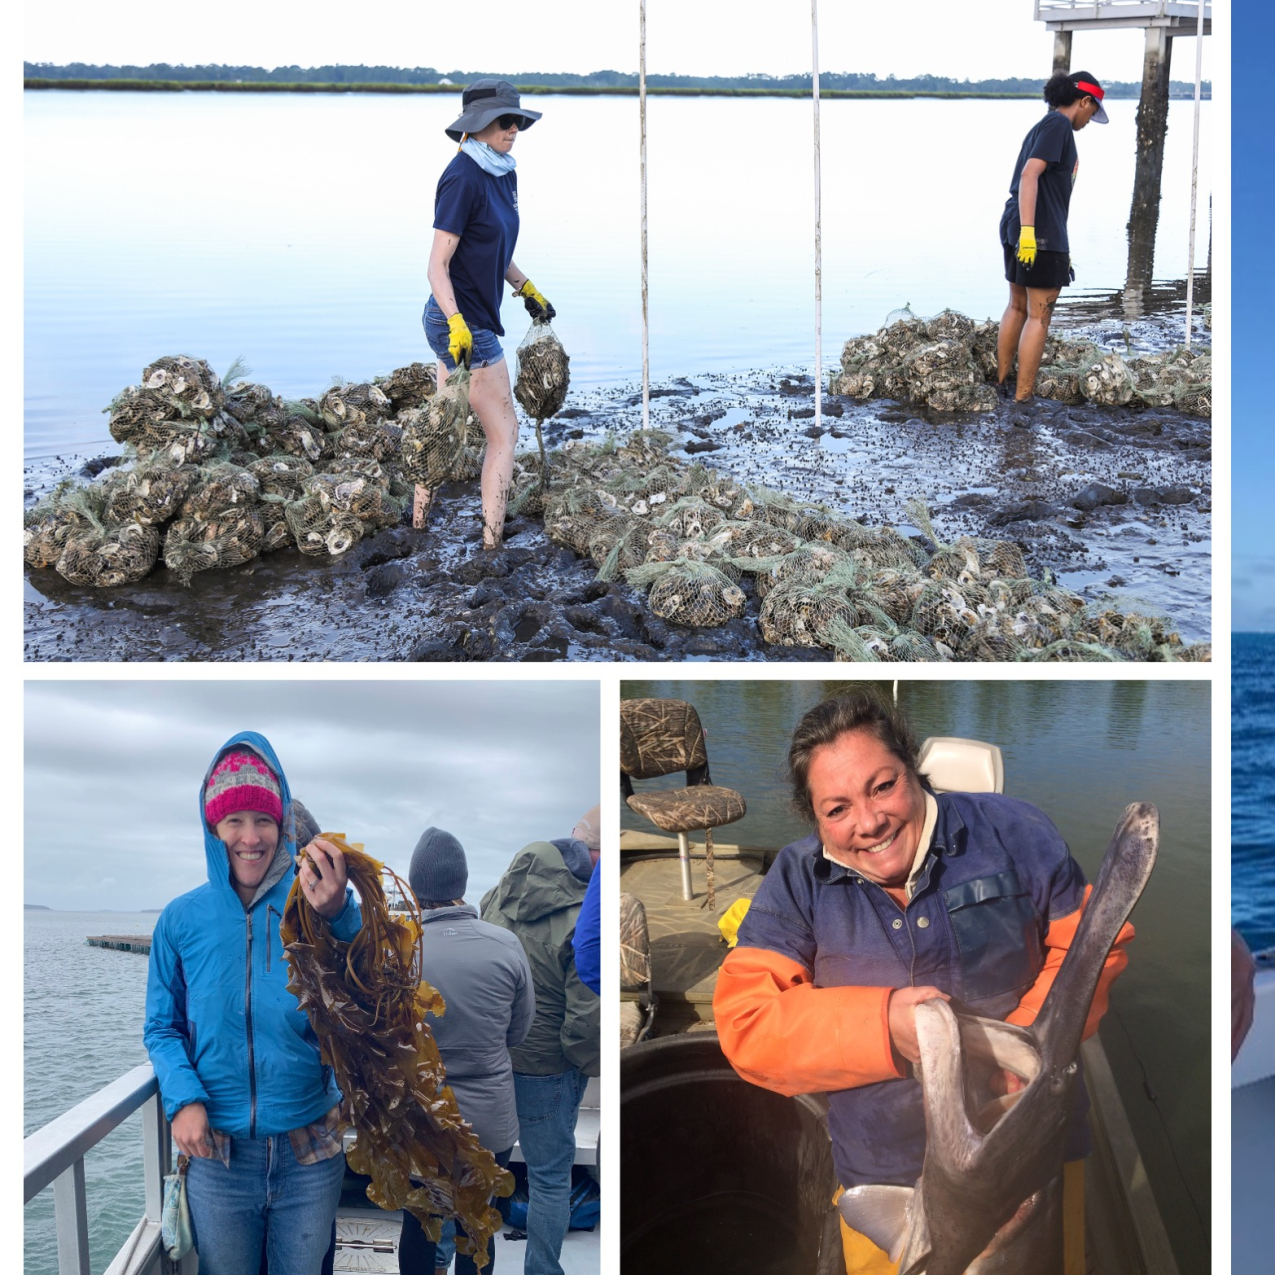 A grid of photos of seafood experts. Erin Arneson (top left); Maggie Allen (bottom left); Angela Caporelli (bottom middle); Kellie Casavalle (right).